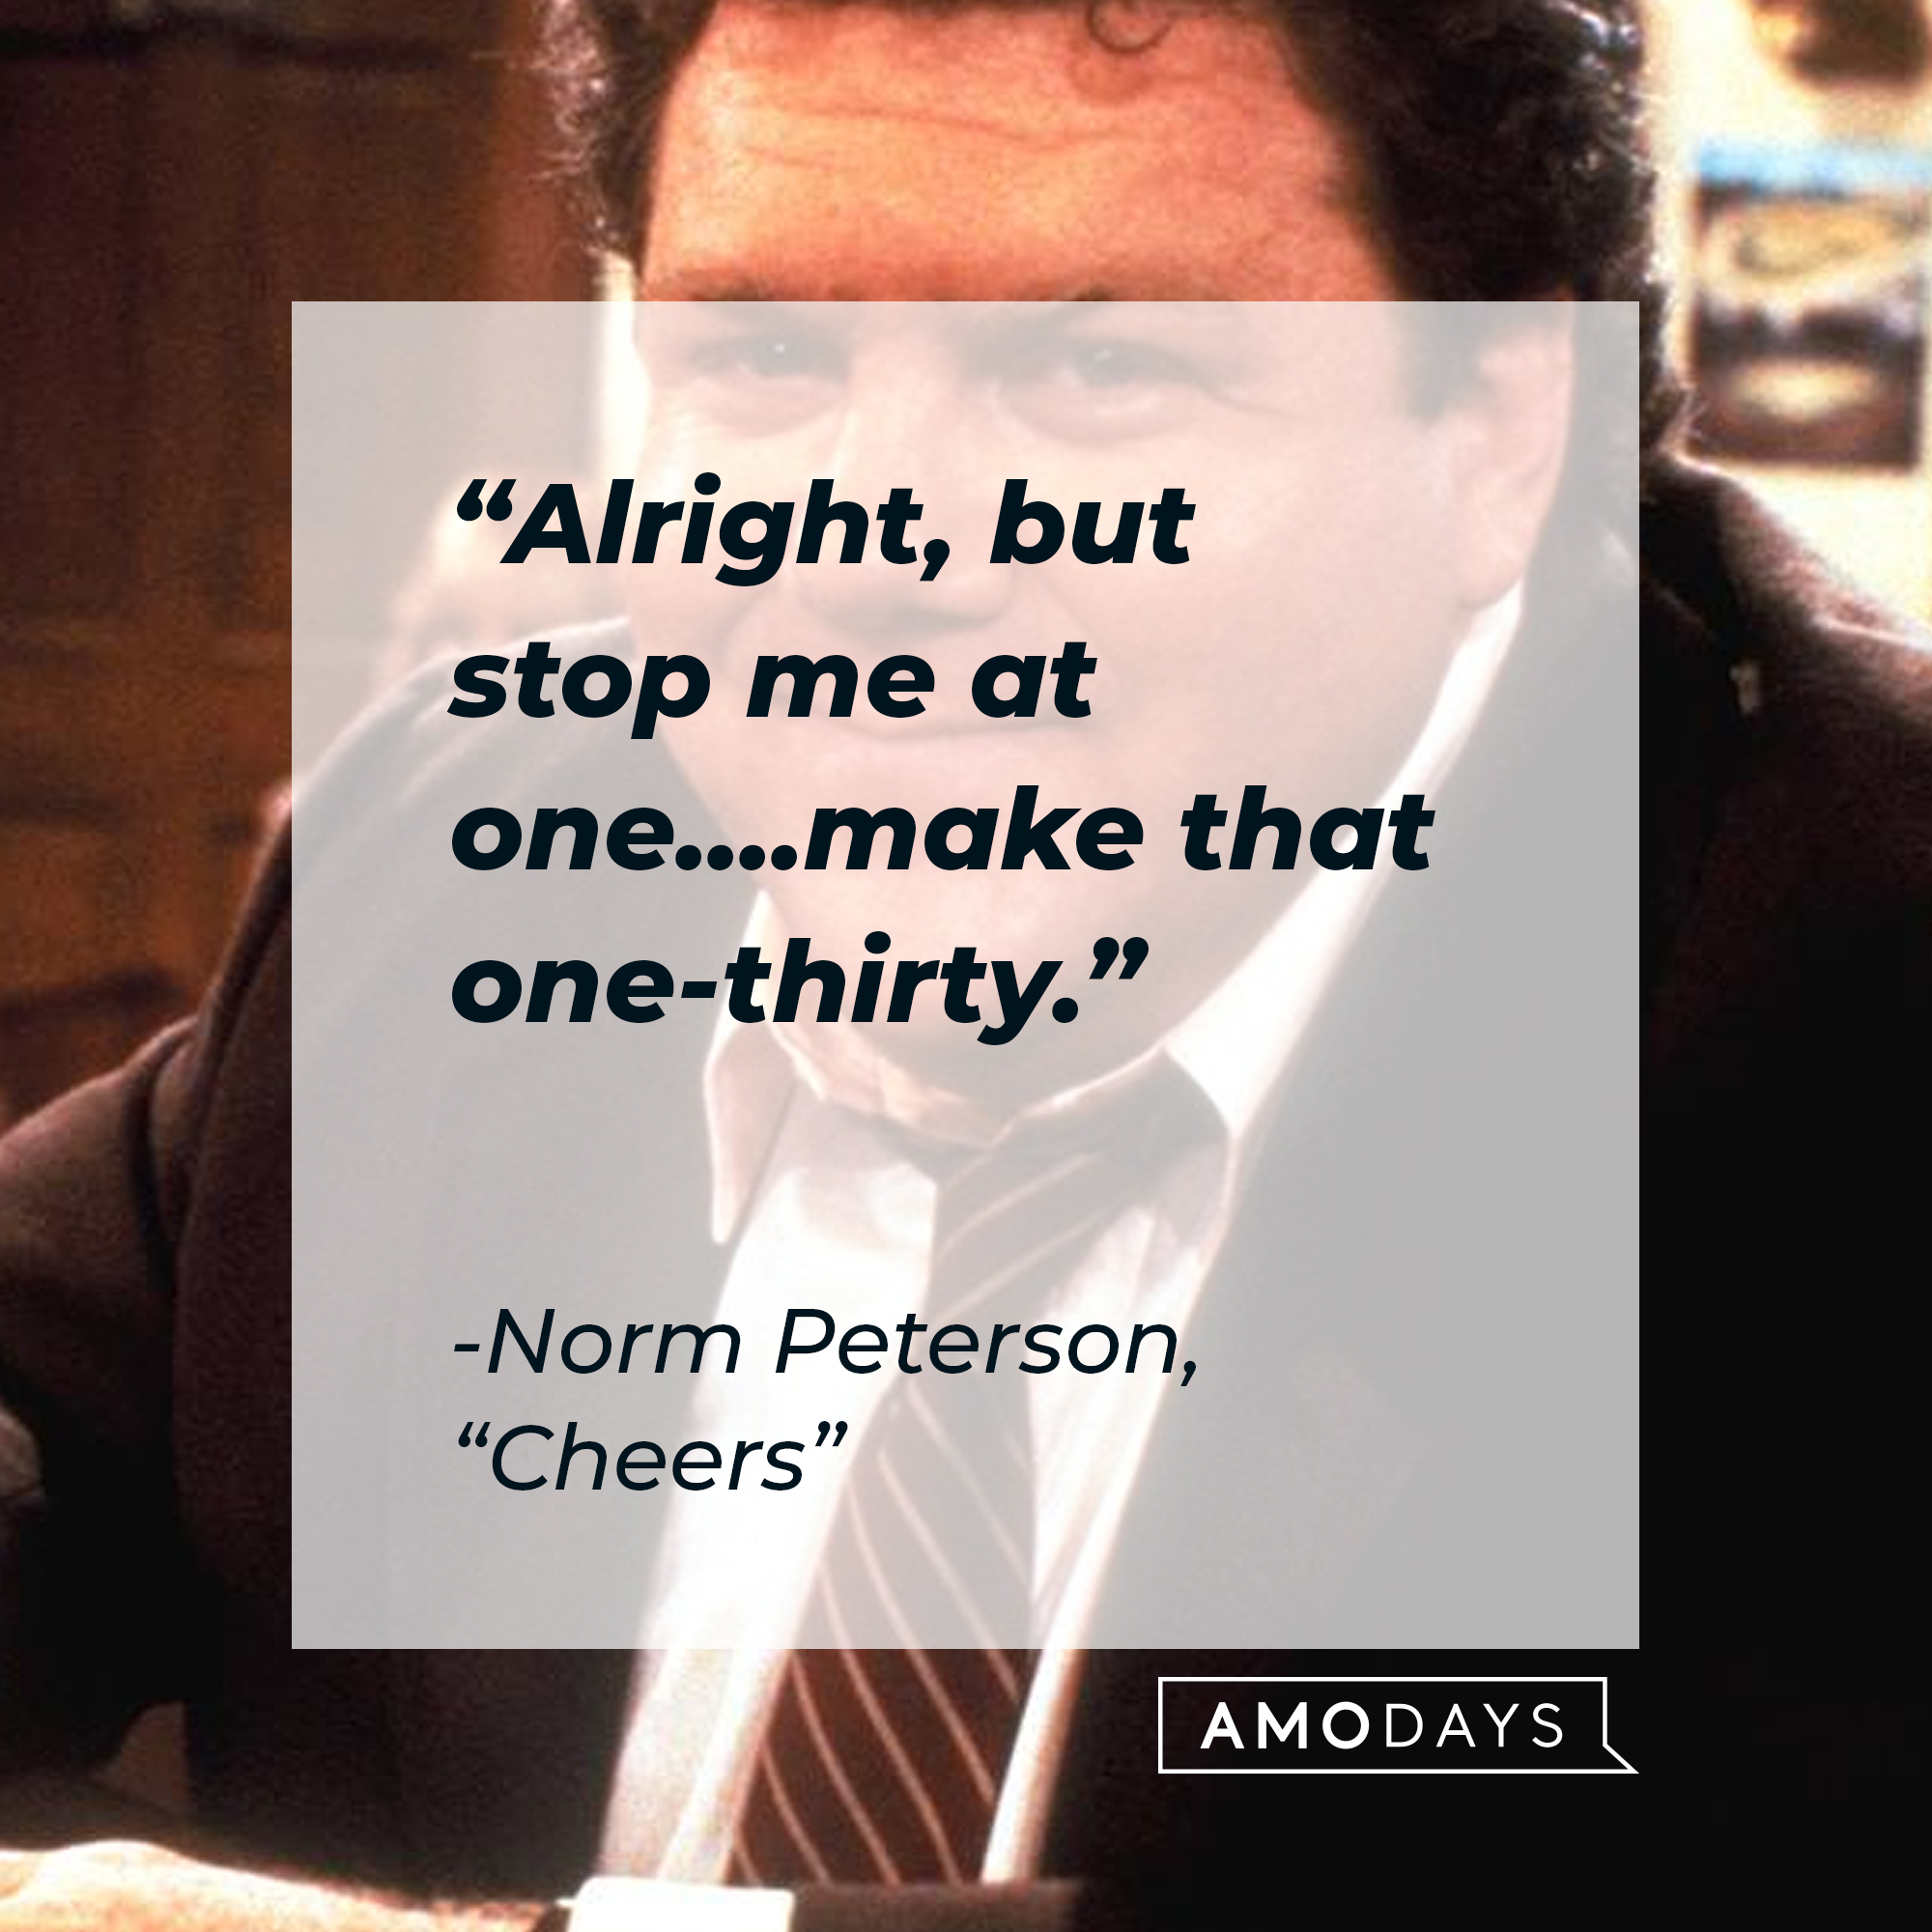 Norm Peterson with his quote: "Alright, but stop me at one....make that one-thirty." | Source: Facebook.com/Cheers